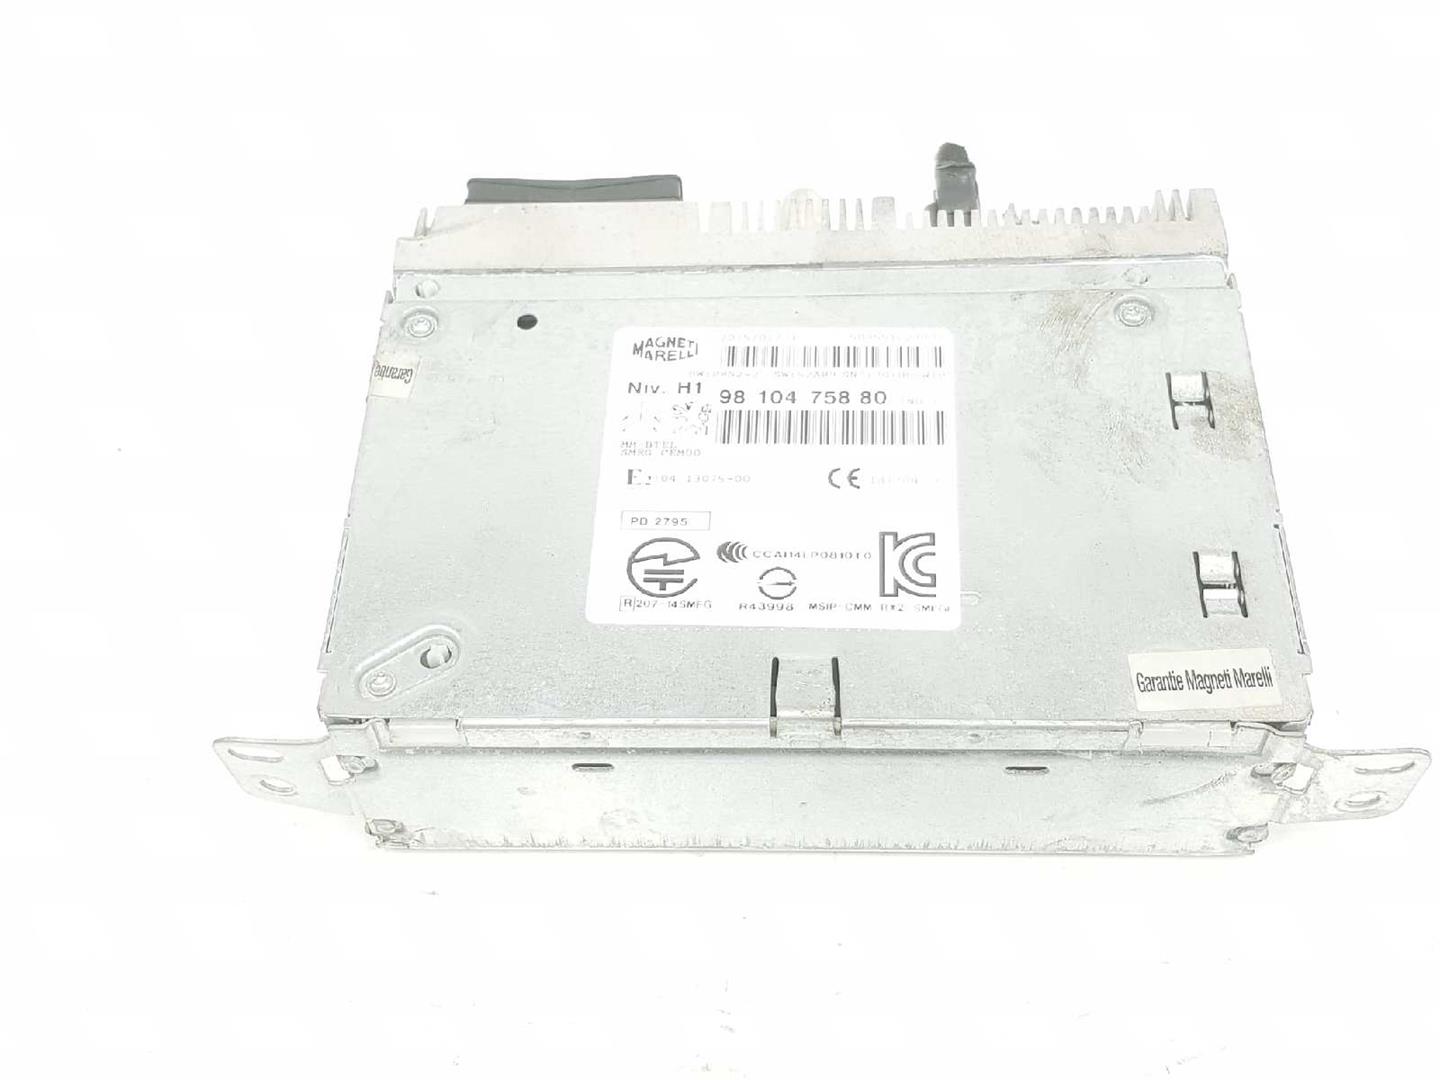 PEUGEOT 308 T9 (2013-2021) Music Player Without GPS 9810475880, 503551223807, R43998 19752902